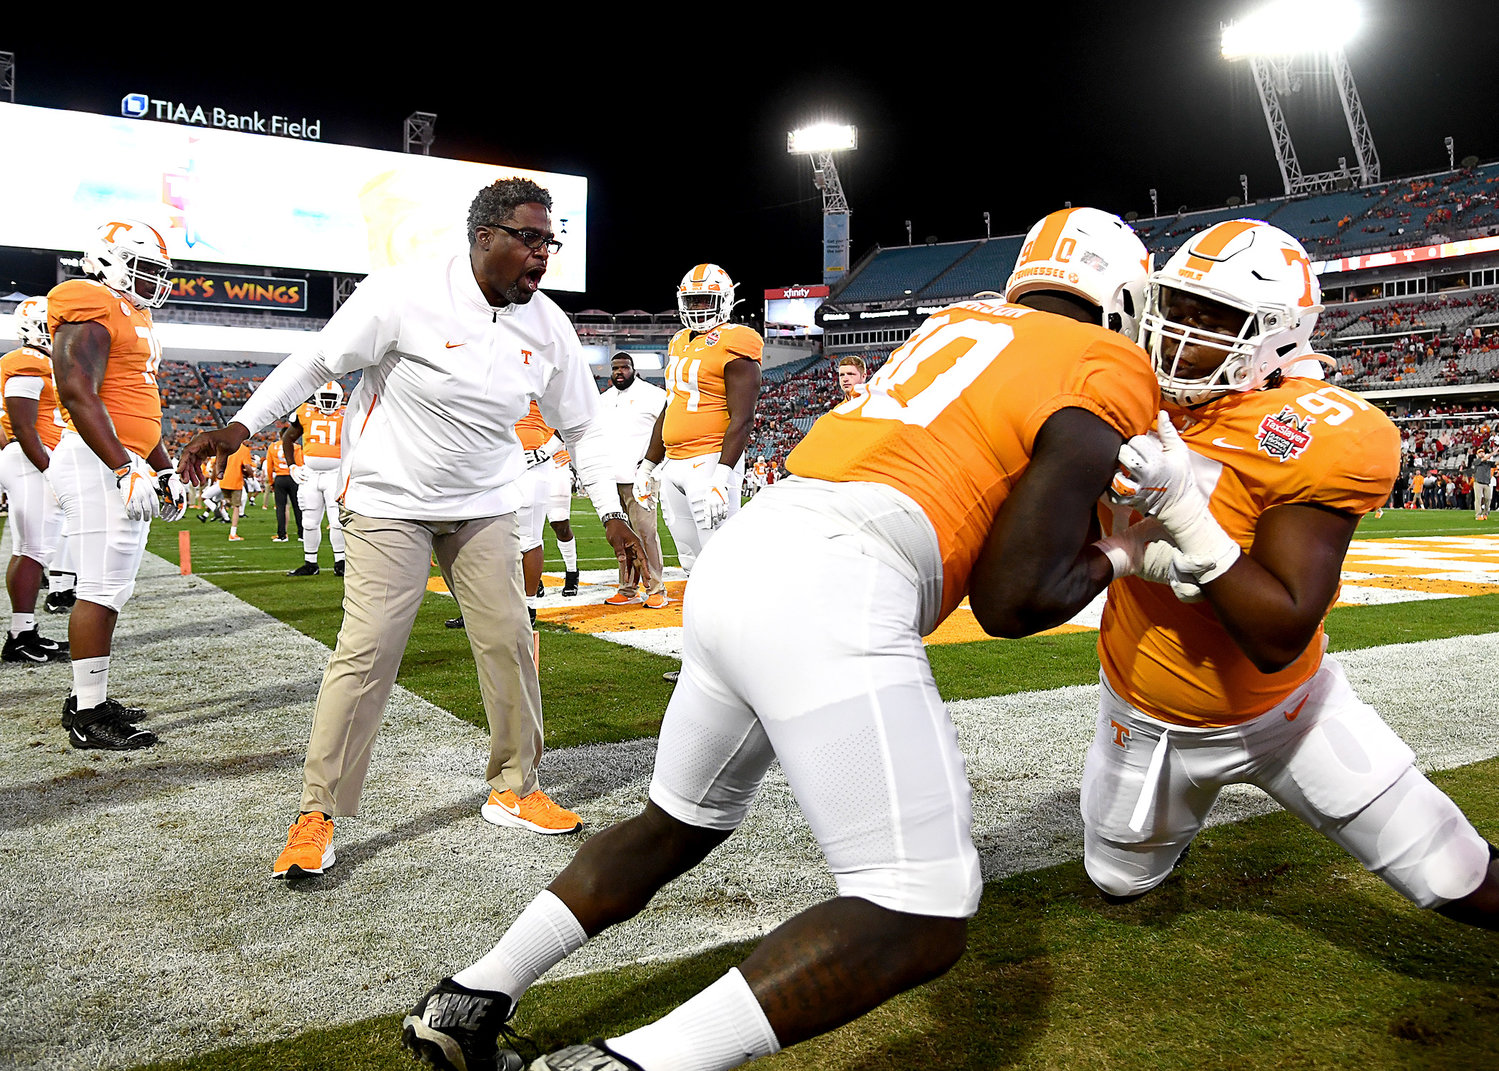 Tennessee Volunteers defensive line coach, Tracy Rocker, warms up players prior to the start of the Gator Bowl NCAA football game against the Indiana Hoosiers Thursday, January 2, 2020, at TIAA Bank Field in Jacksonville, Fla.